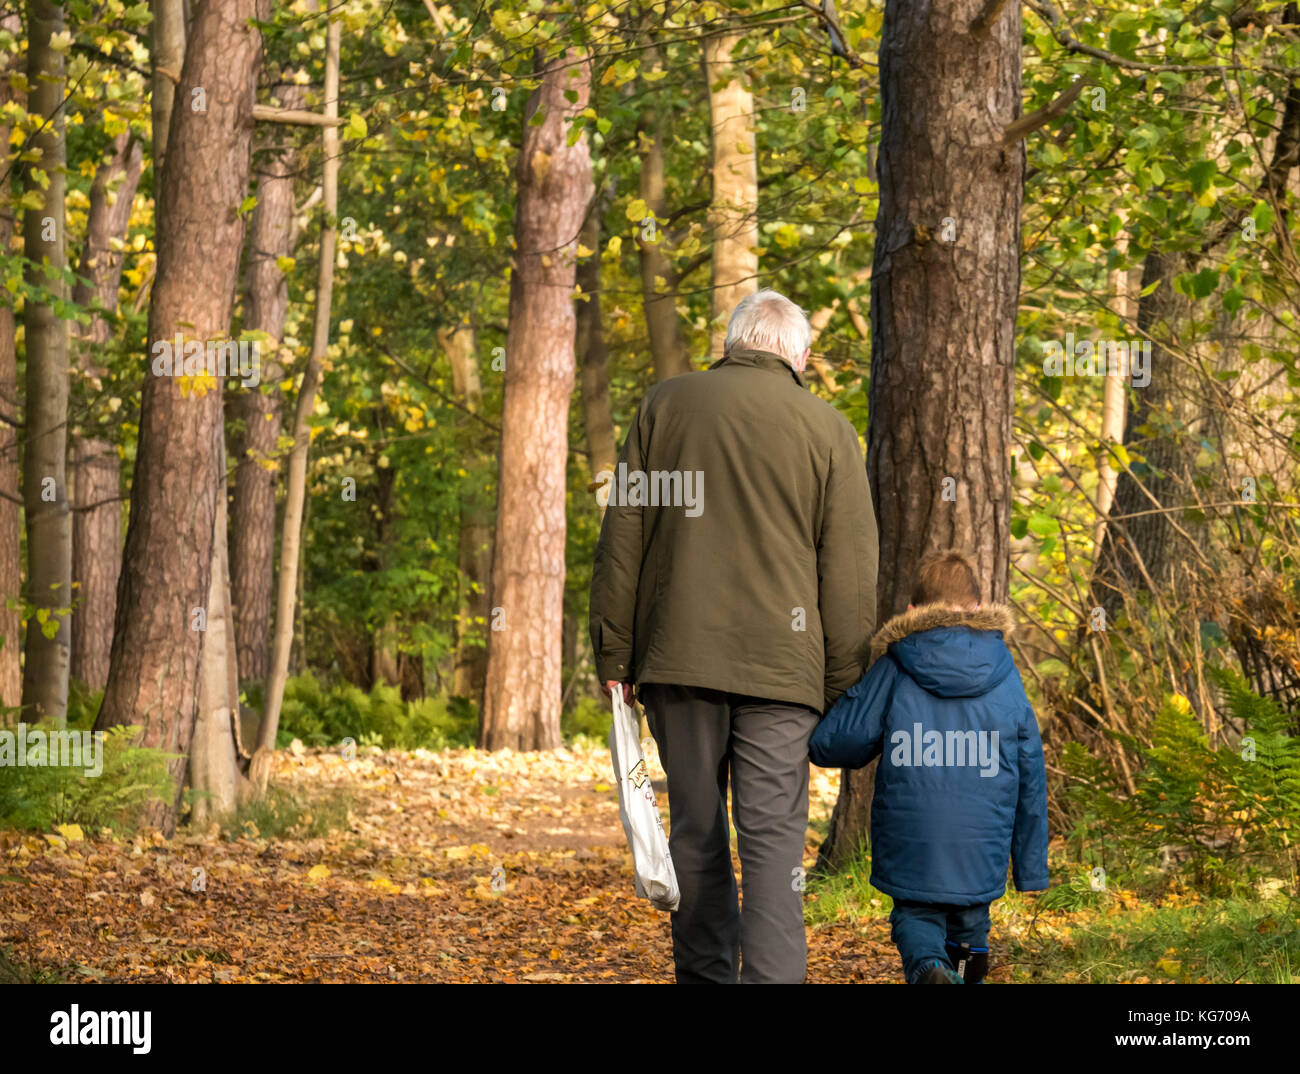 A grandfather holding hand of young grandson walking on woodland path covered in dead leaves on a cold Autumn day, Scotland, UK Stock Photo